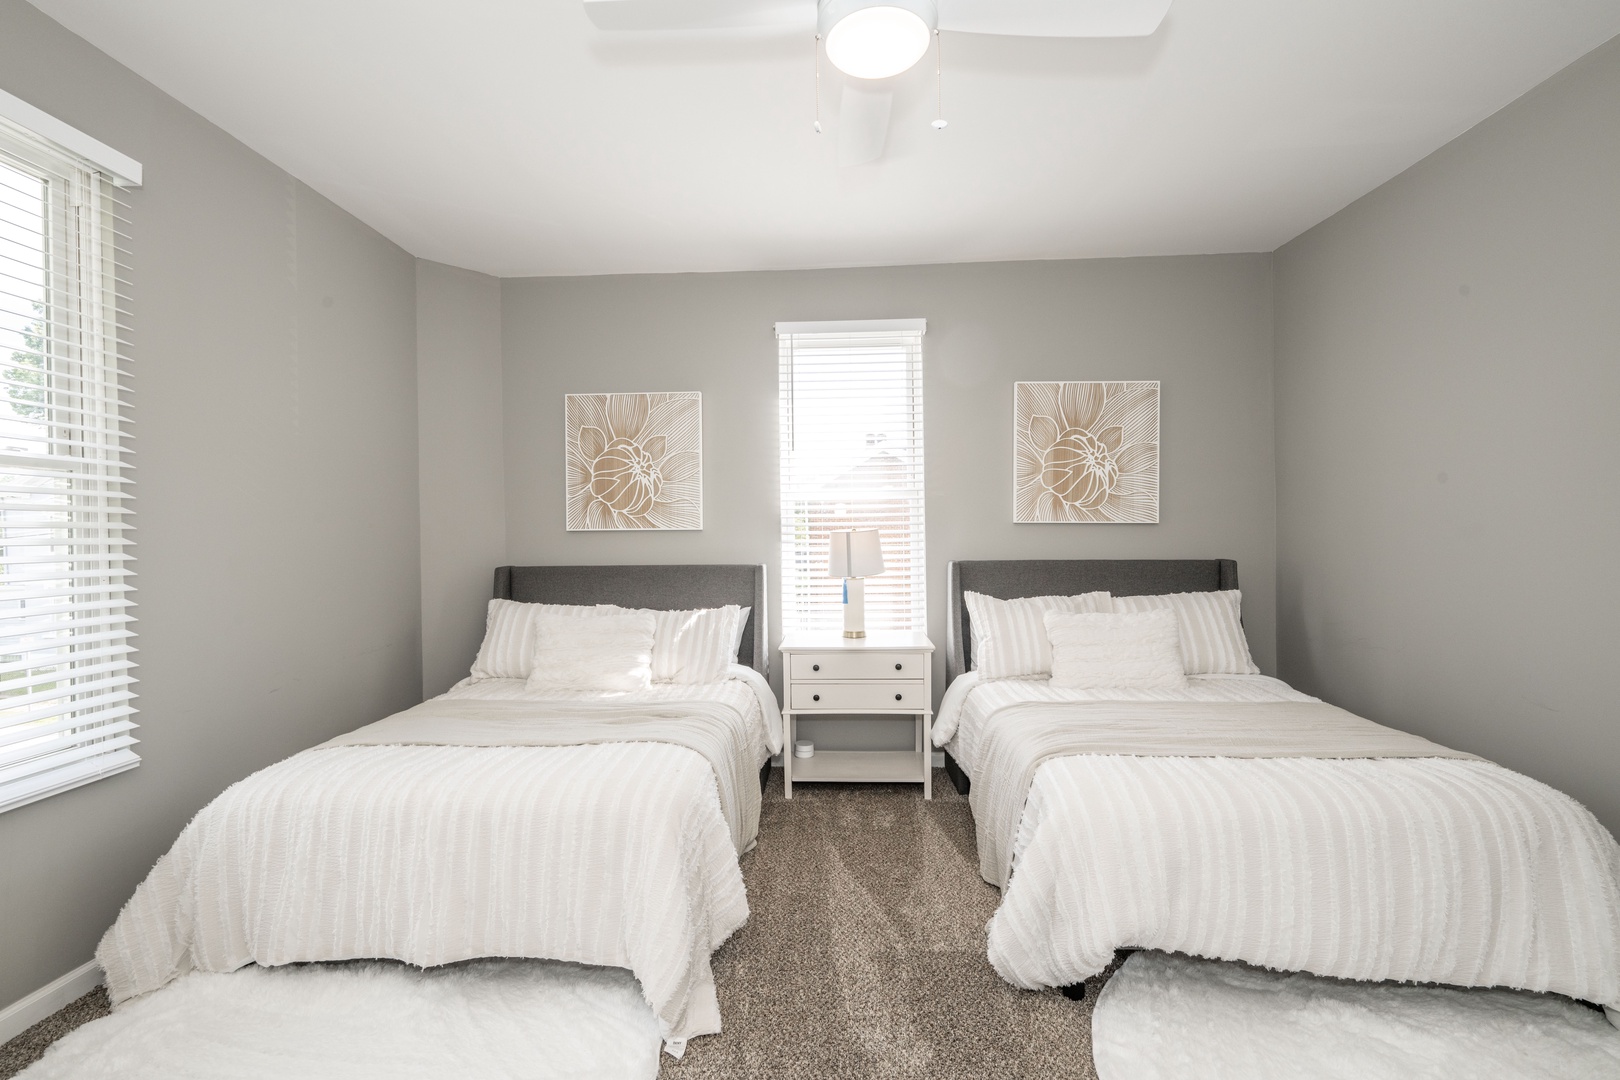 The final 2nd floor bedroom offers a pair of full-sized beds & vanity/desk space